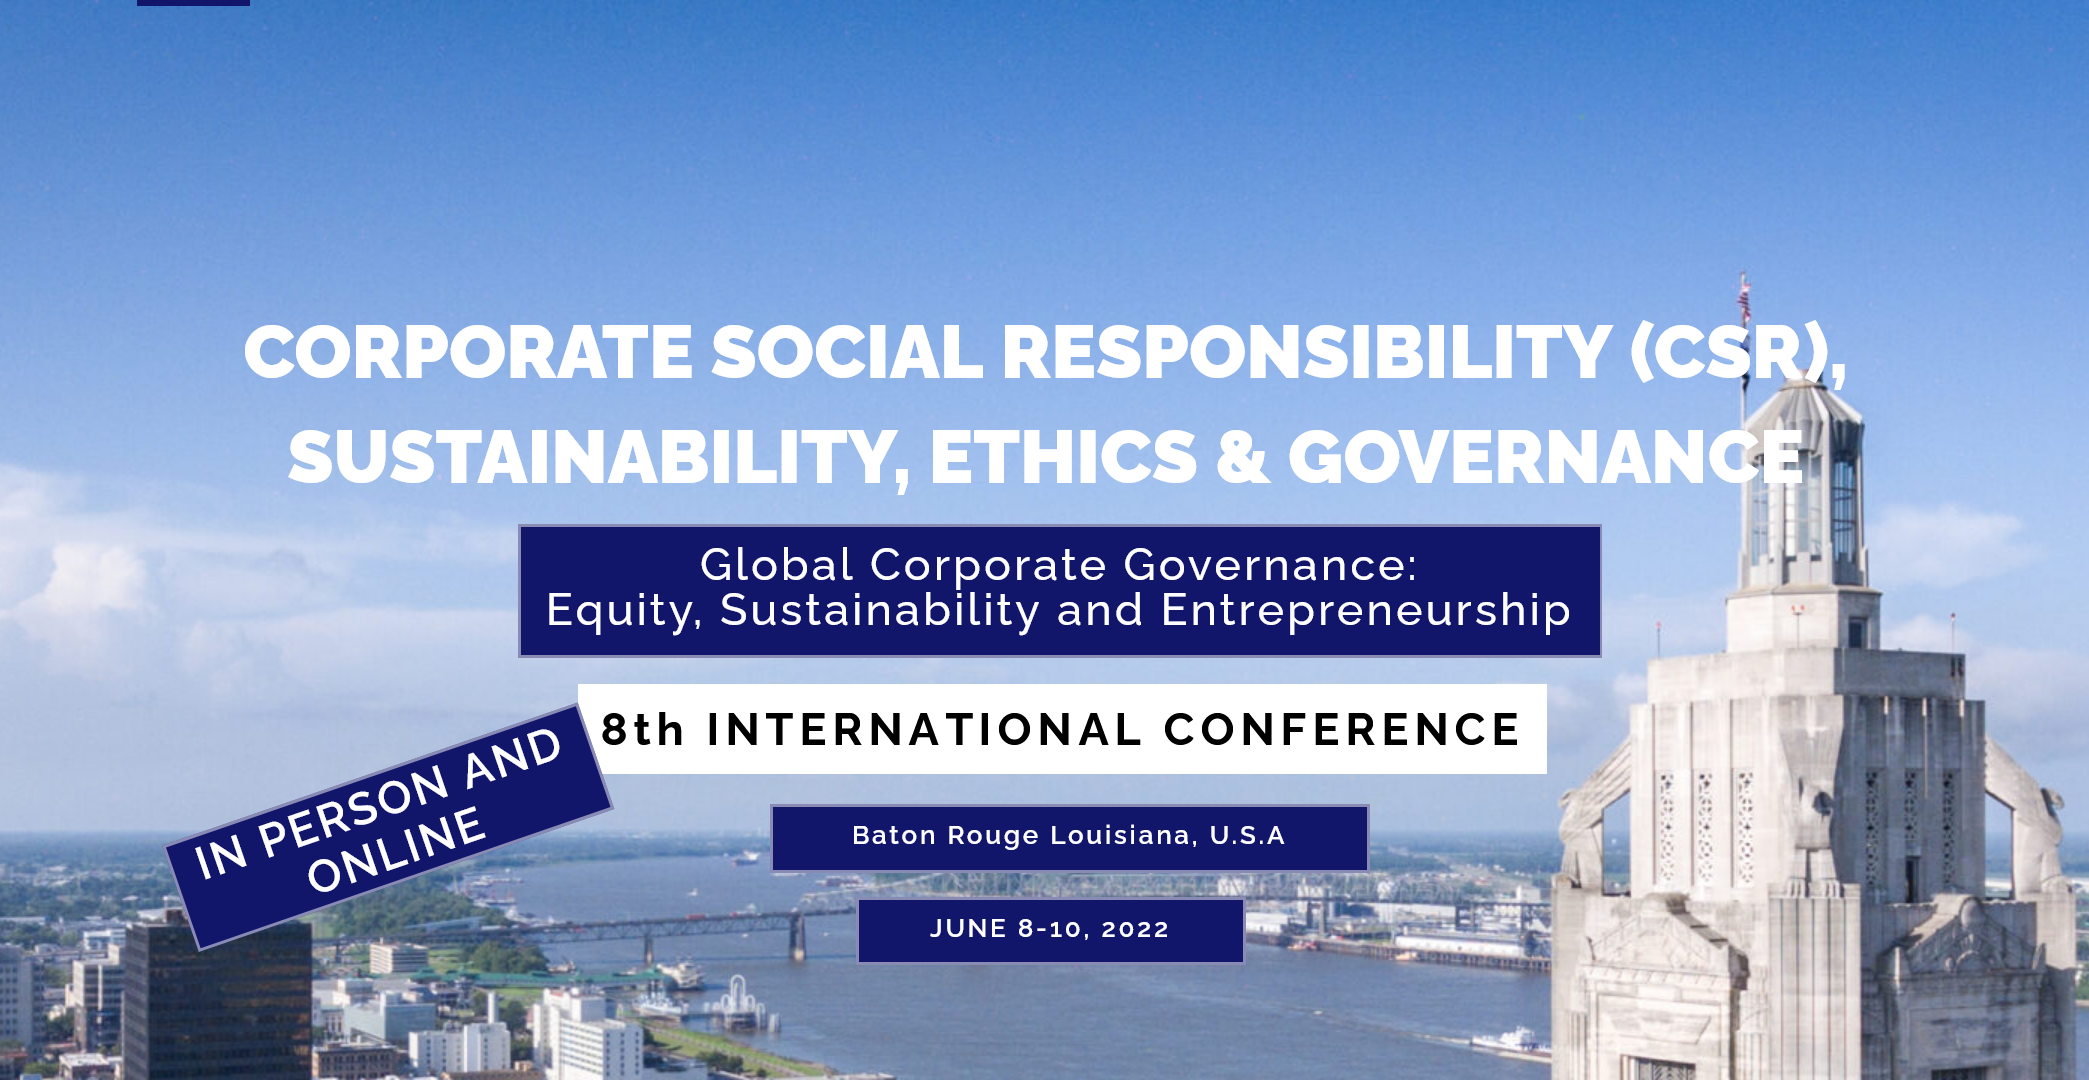 Global Corporate Governance: Equity, Sustainability and Entrepreneurship